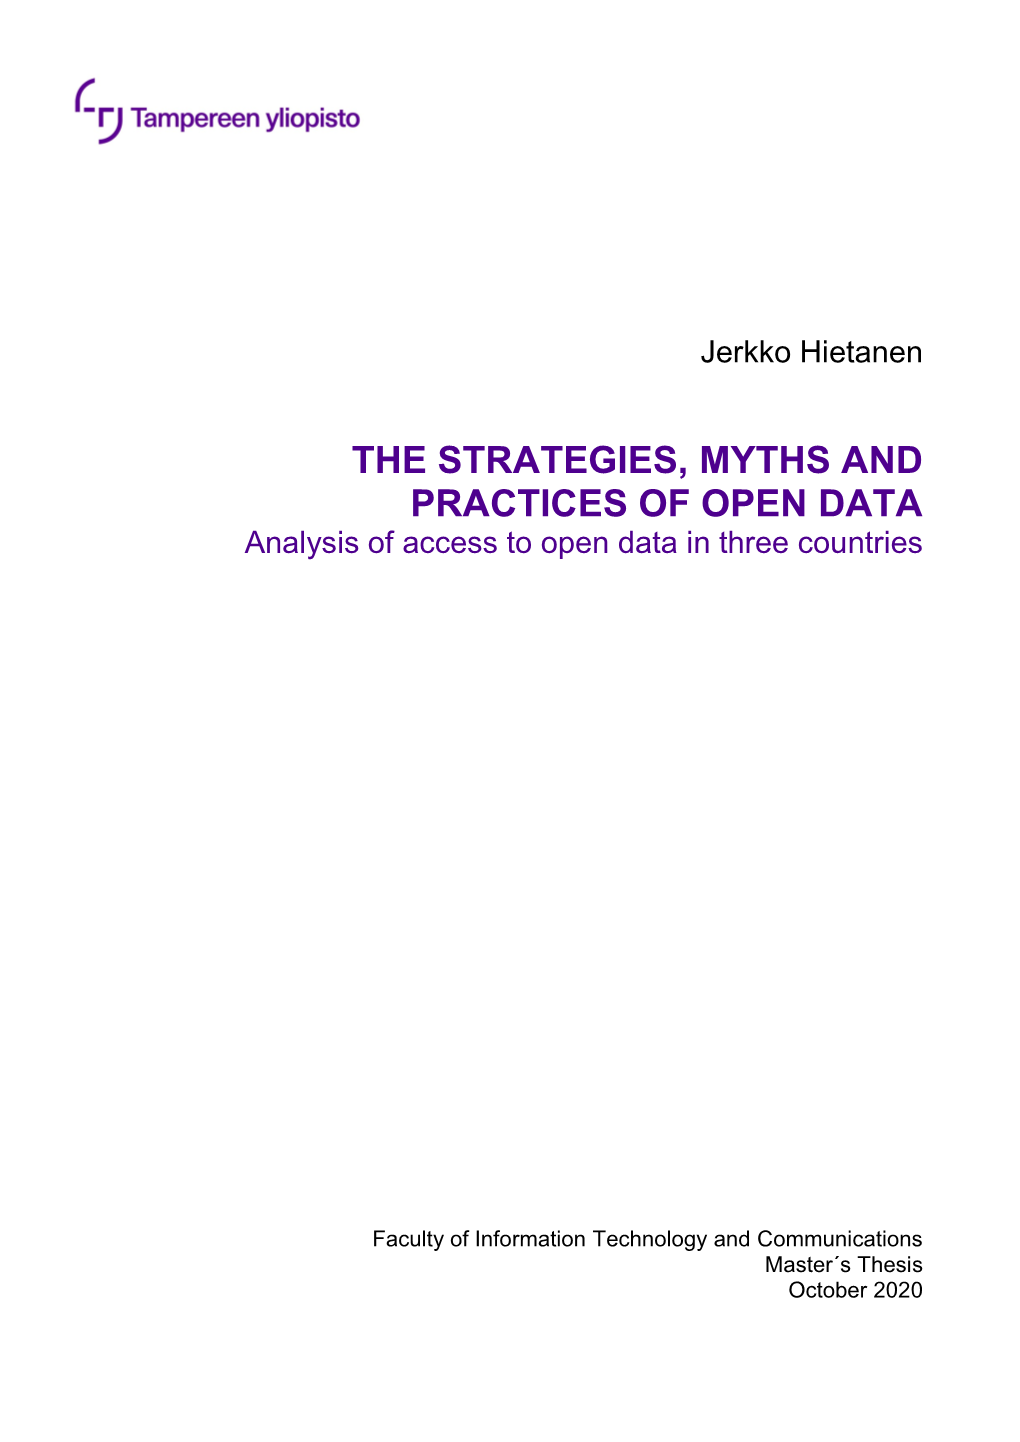 THE STRATEGIES, MYTHS and PRACTICES of OPEN DATA Analysis of Access to Open Data in Three Countries